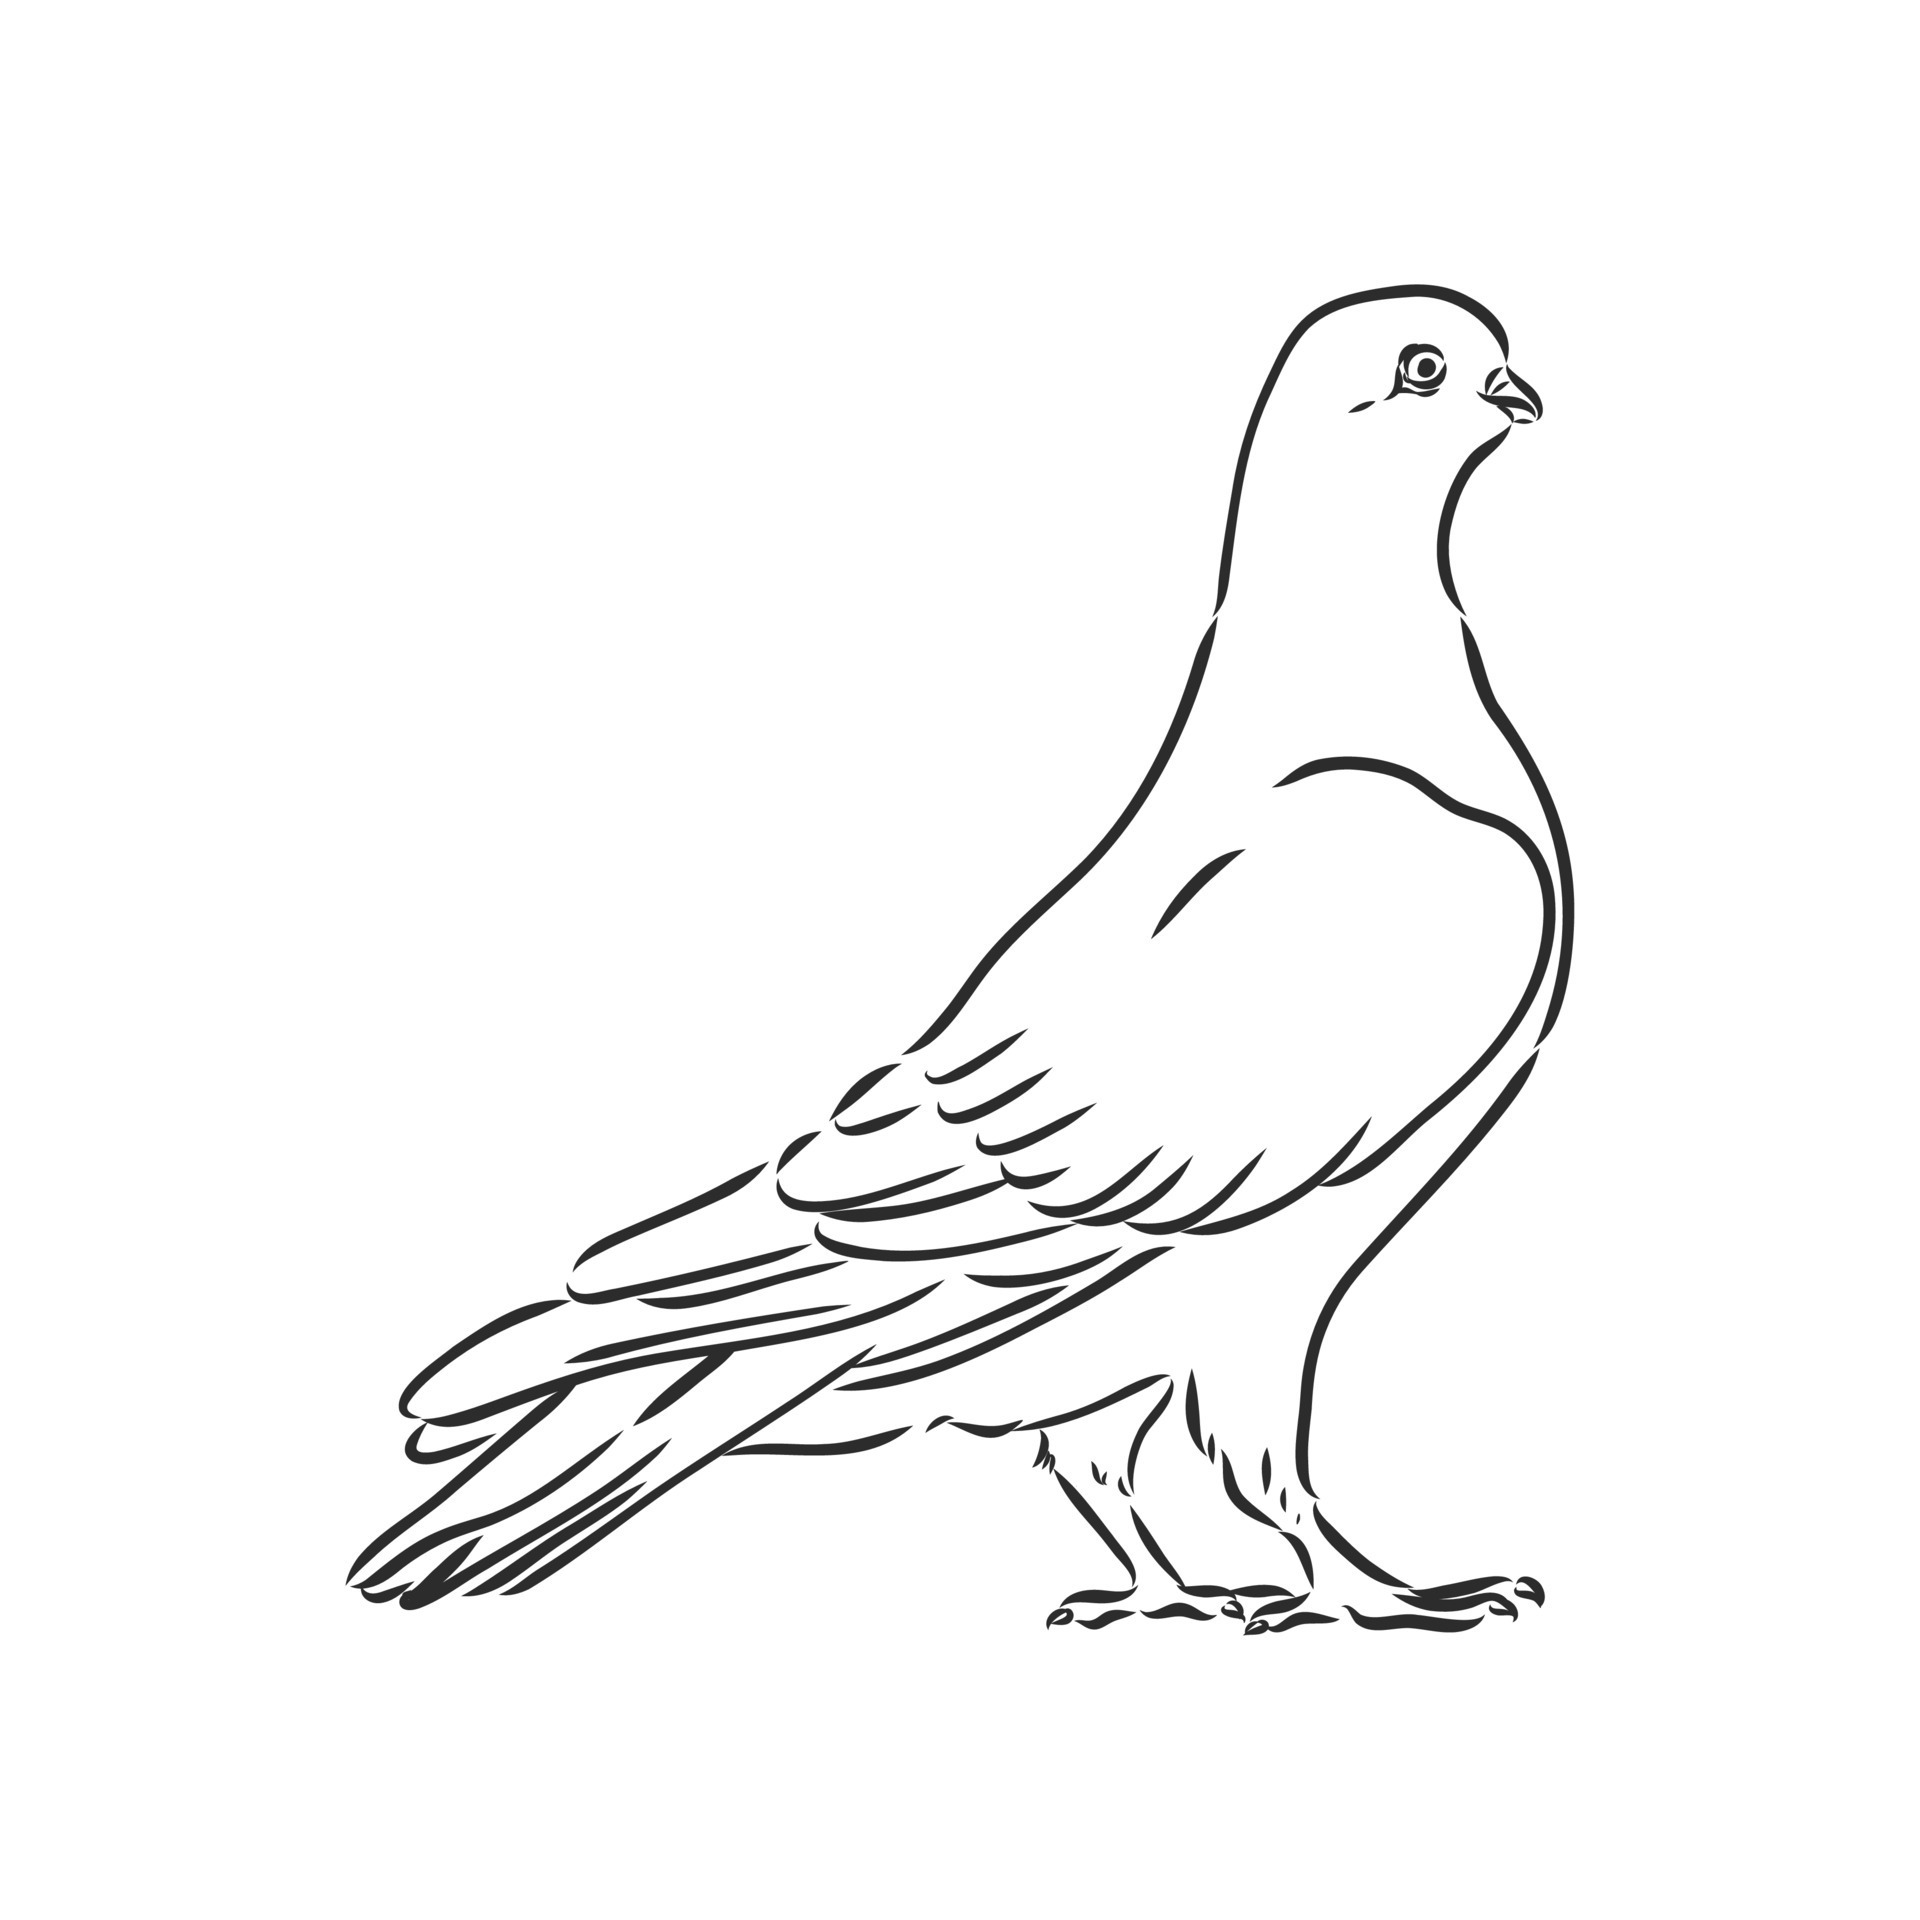 47+ Pigeon sketch Free Stock Photos - StockFreeImages